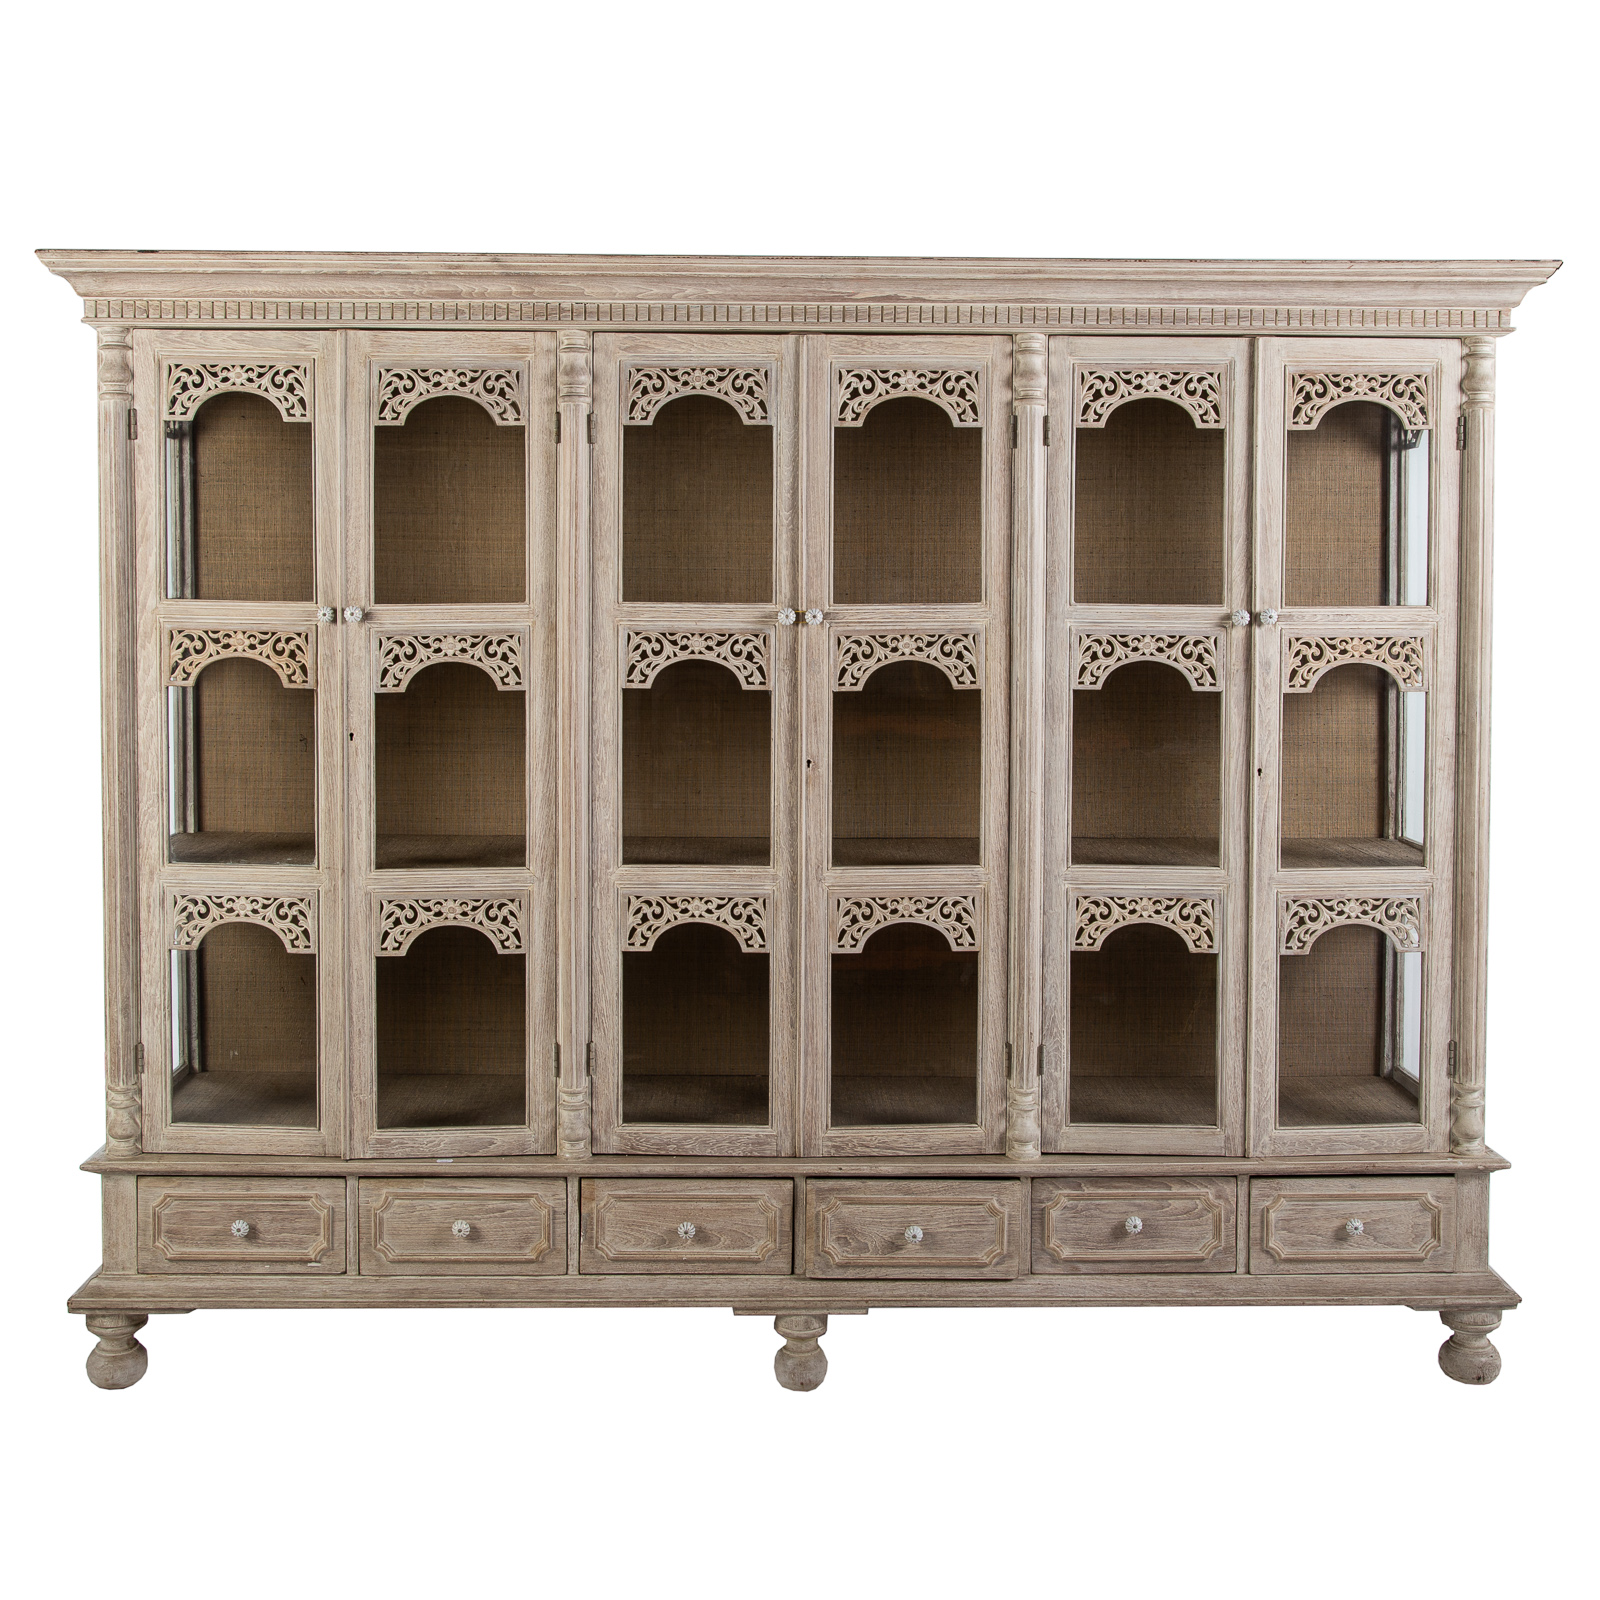 CONTINENTAL STYLE DISTRESSED CUPBOARD 29e50b